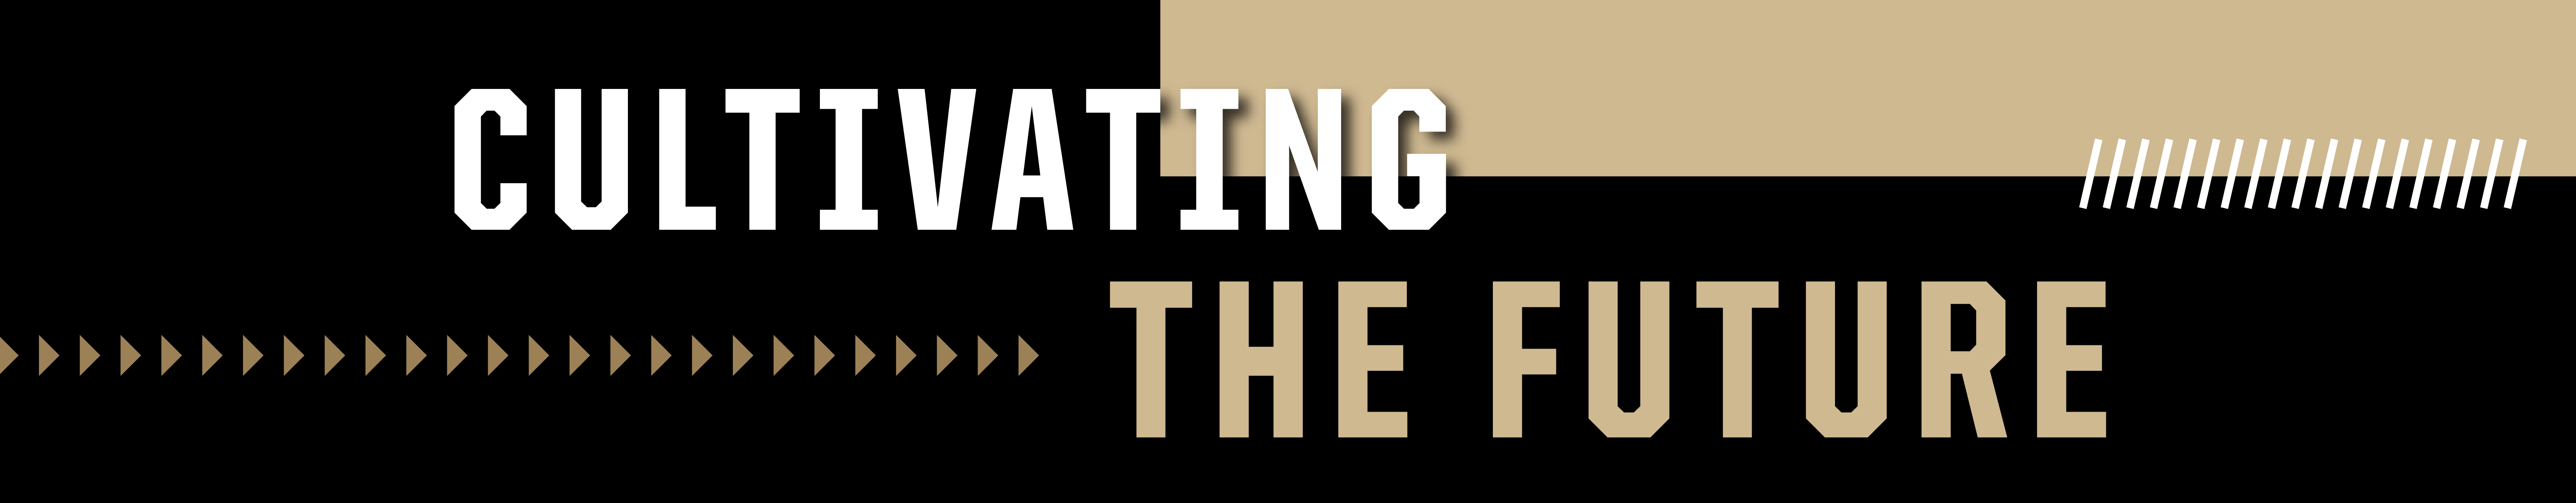 Cultivating the Future Graphics Banner